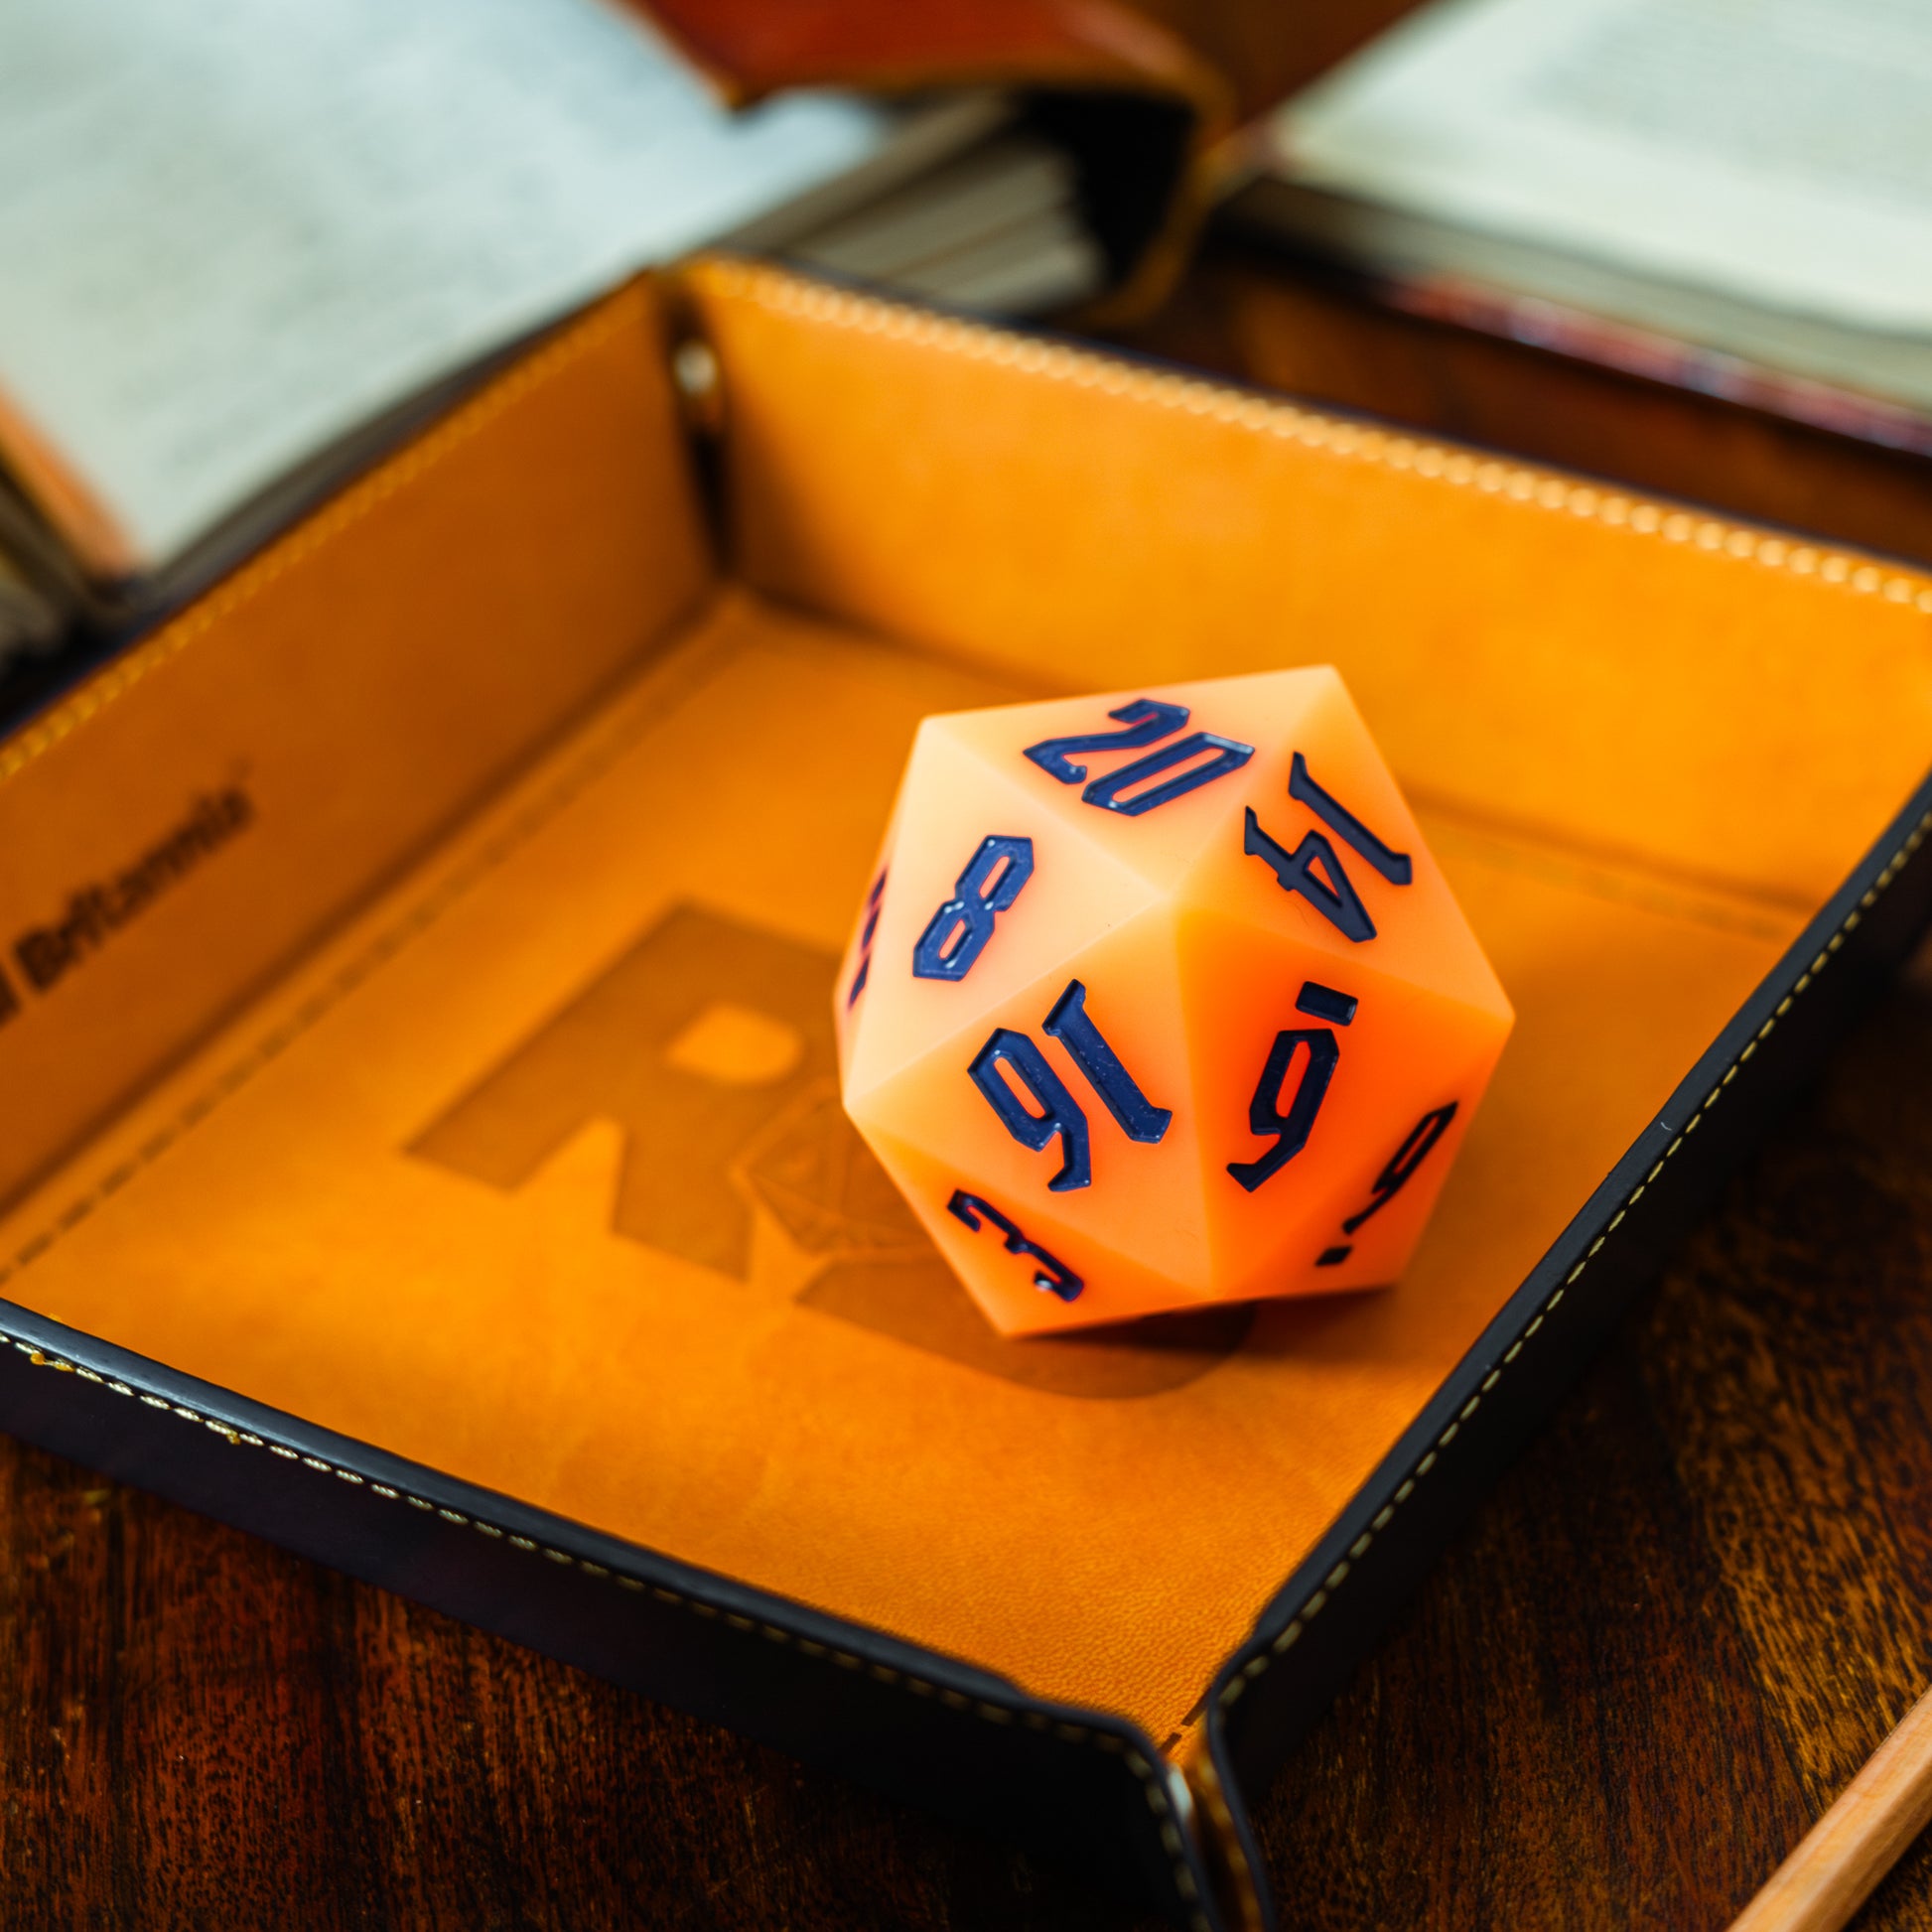 Roll Britannia Orange Bouncy Silicon 55mm D20 Glow in the Dark Dungeons and Dragons Dice on branded leather dice tray